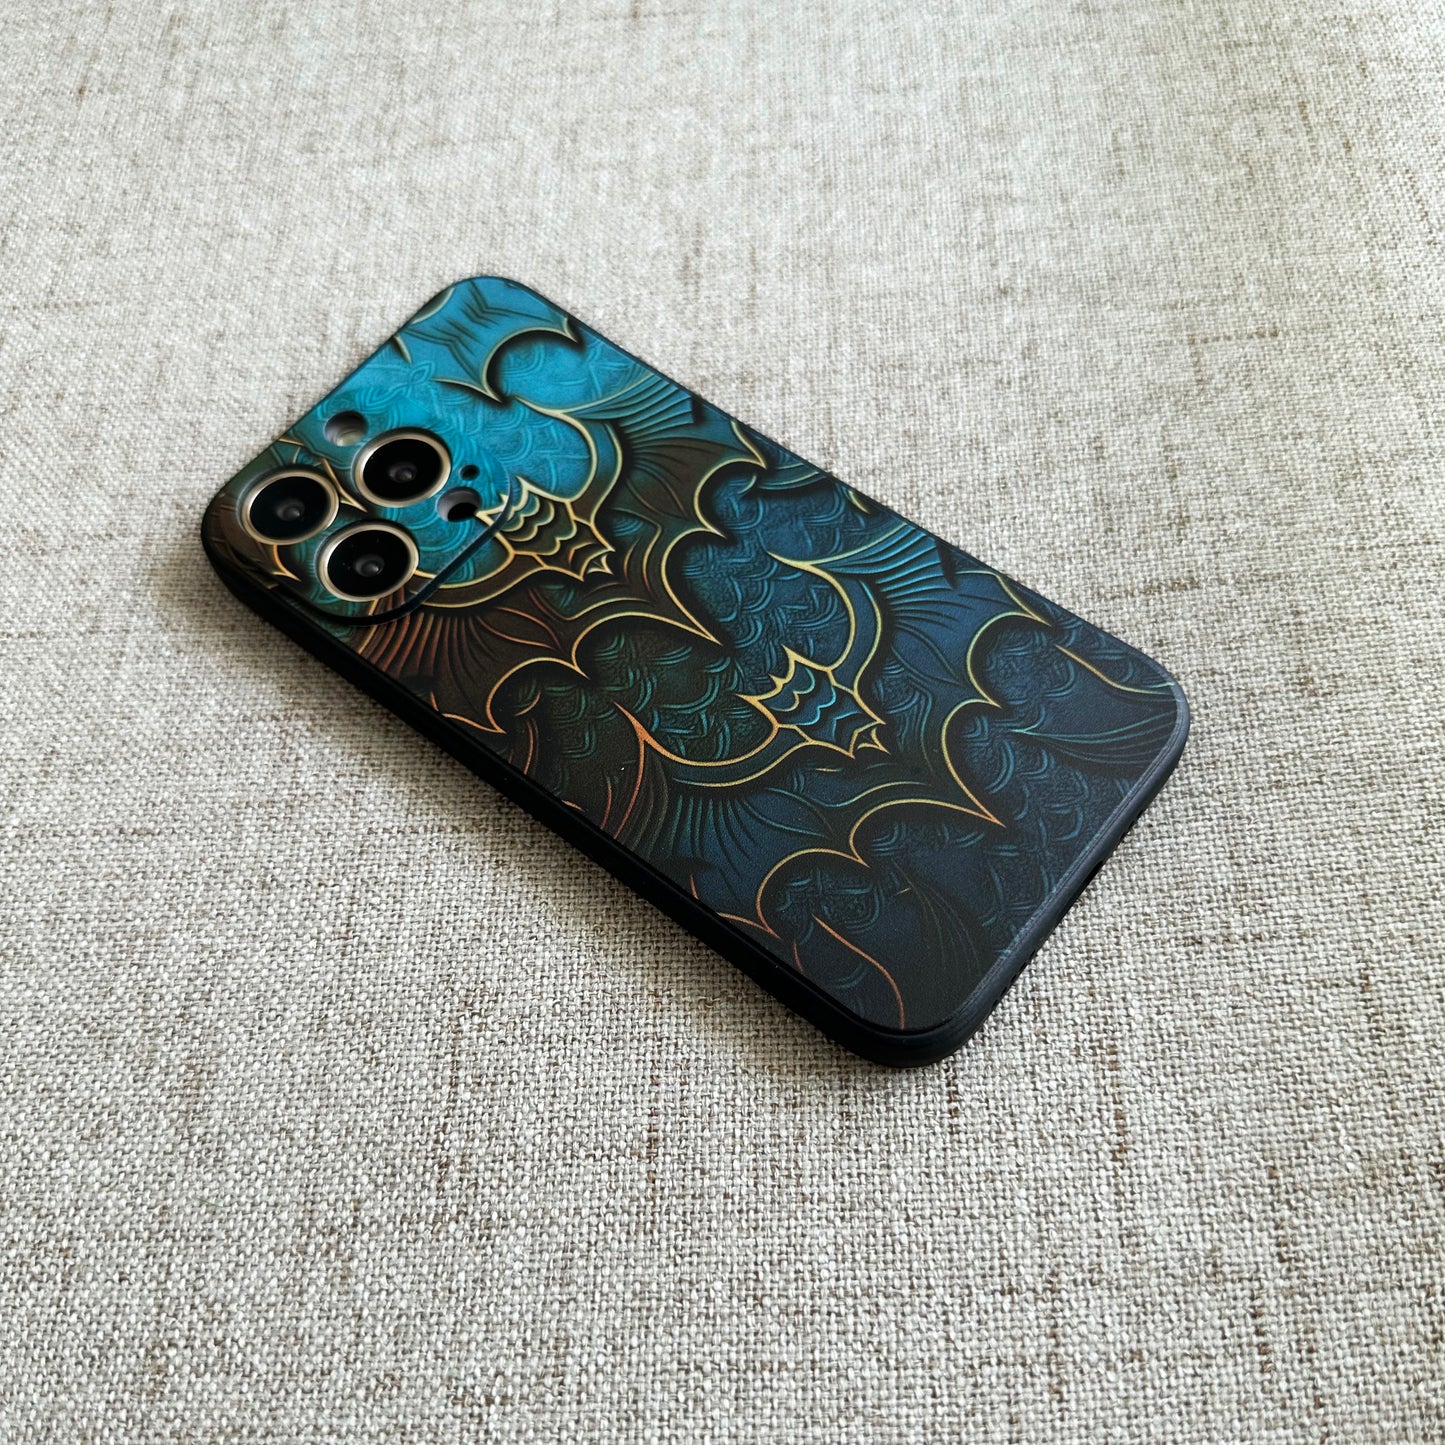 The Bat Silicon iPhone Case